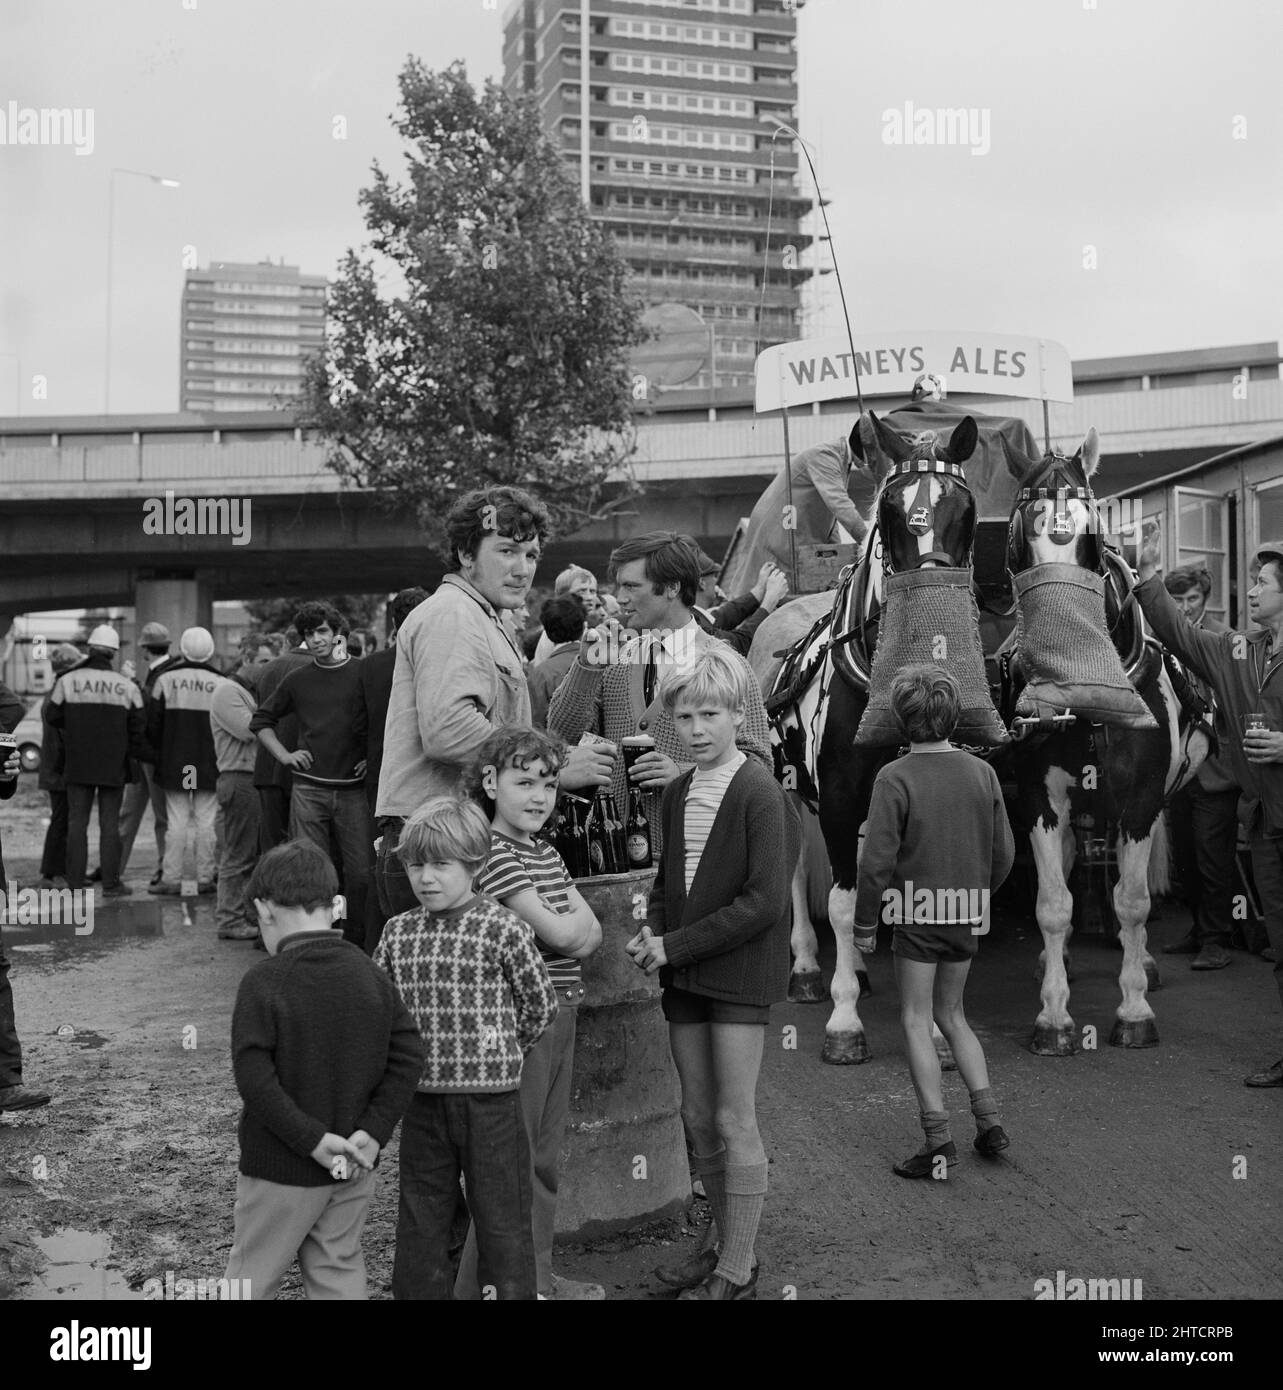 Westway Flyover, A40, Kensington and Chelsea, London, 28/07/1970. Watney's dray horses eating from nosebags during the celebration for the opening of the Westway Flyover. Work on site for the Western Avenue Extension began on the 1st September 1966 and the Westway as it became known was officially opened on the 28th July 1970. The elevated highway connecting the A40 at White City to Marylebone Road in Paddington, at around 2 &#xbd; miles was the longest in Europe. The construction was organised into six sections. Sections 1, 4, 5 &amp; 6 formed the main flyover into central London with Section Stock Photo